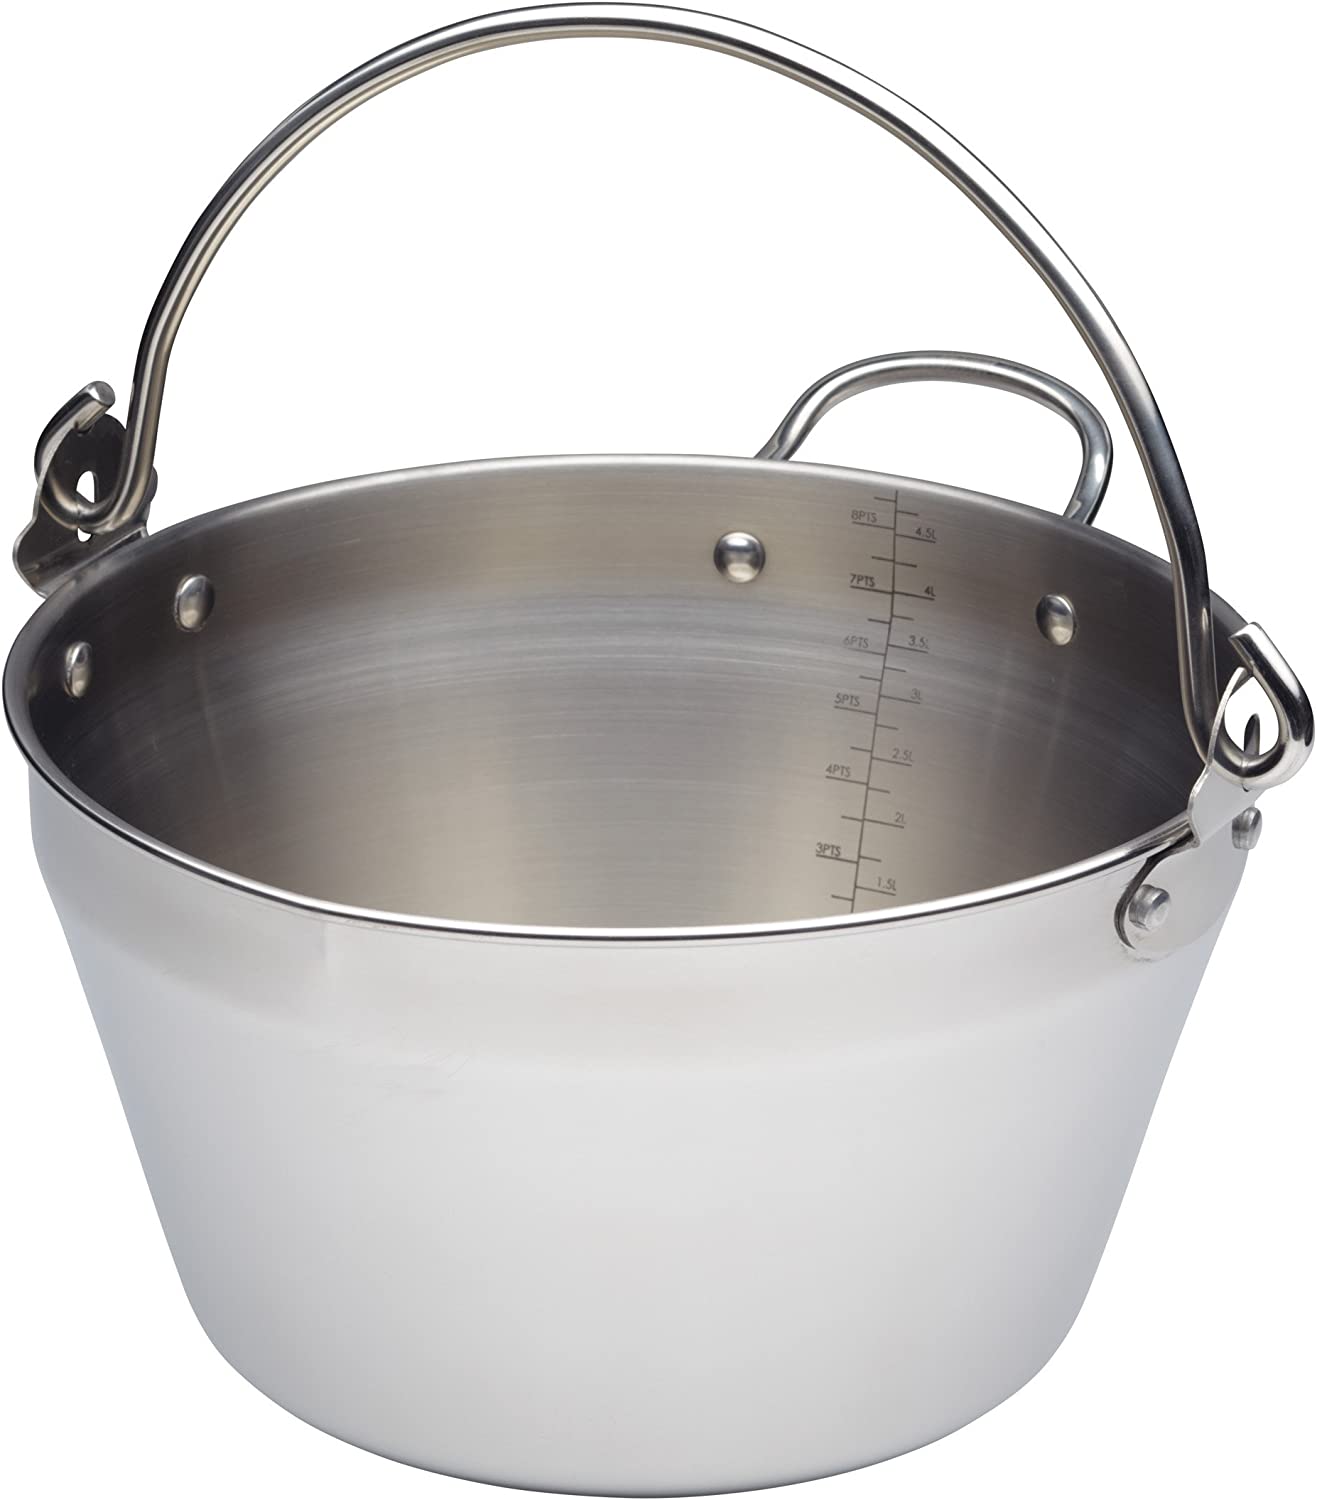 Kitchencraft Home Made Maslin Pan with Handle, Stainless Steel, 4.5 Litre